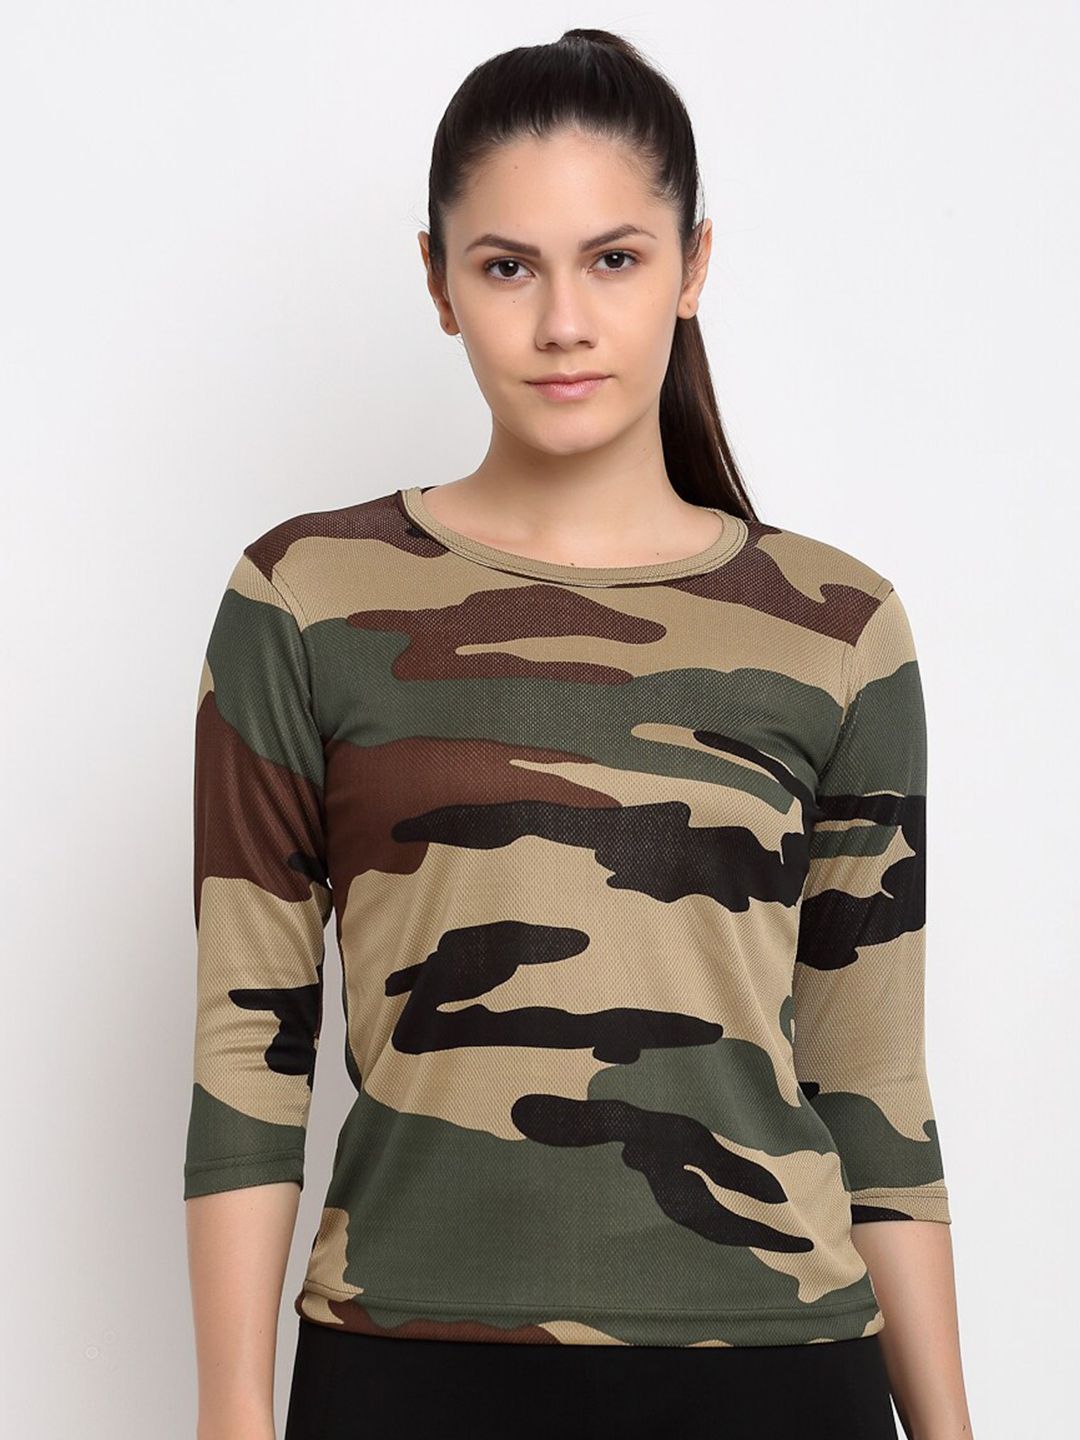 ARMISTO Women Olive Green & Beige Camouflage Printed Dri-FIT Slim Fit Training or Gym T-shirt Price in India